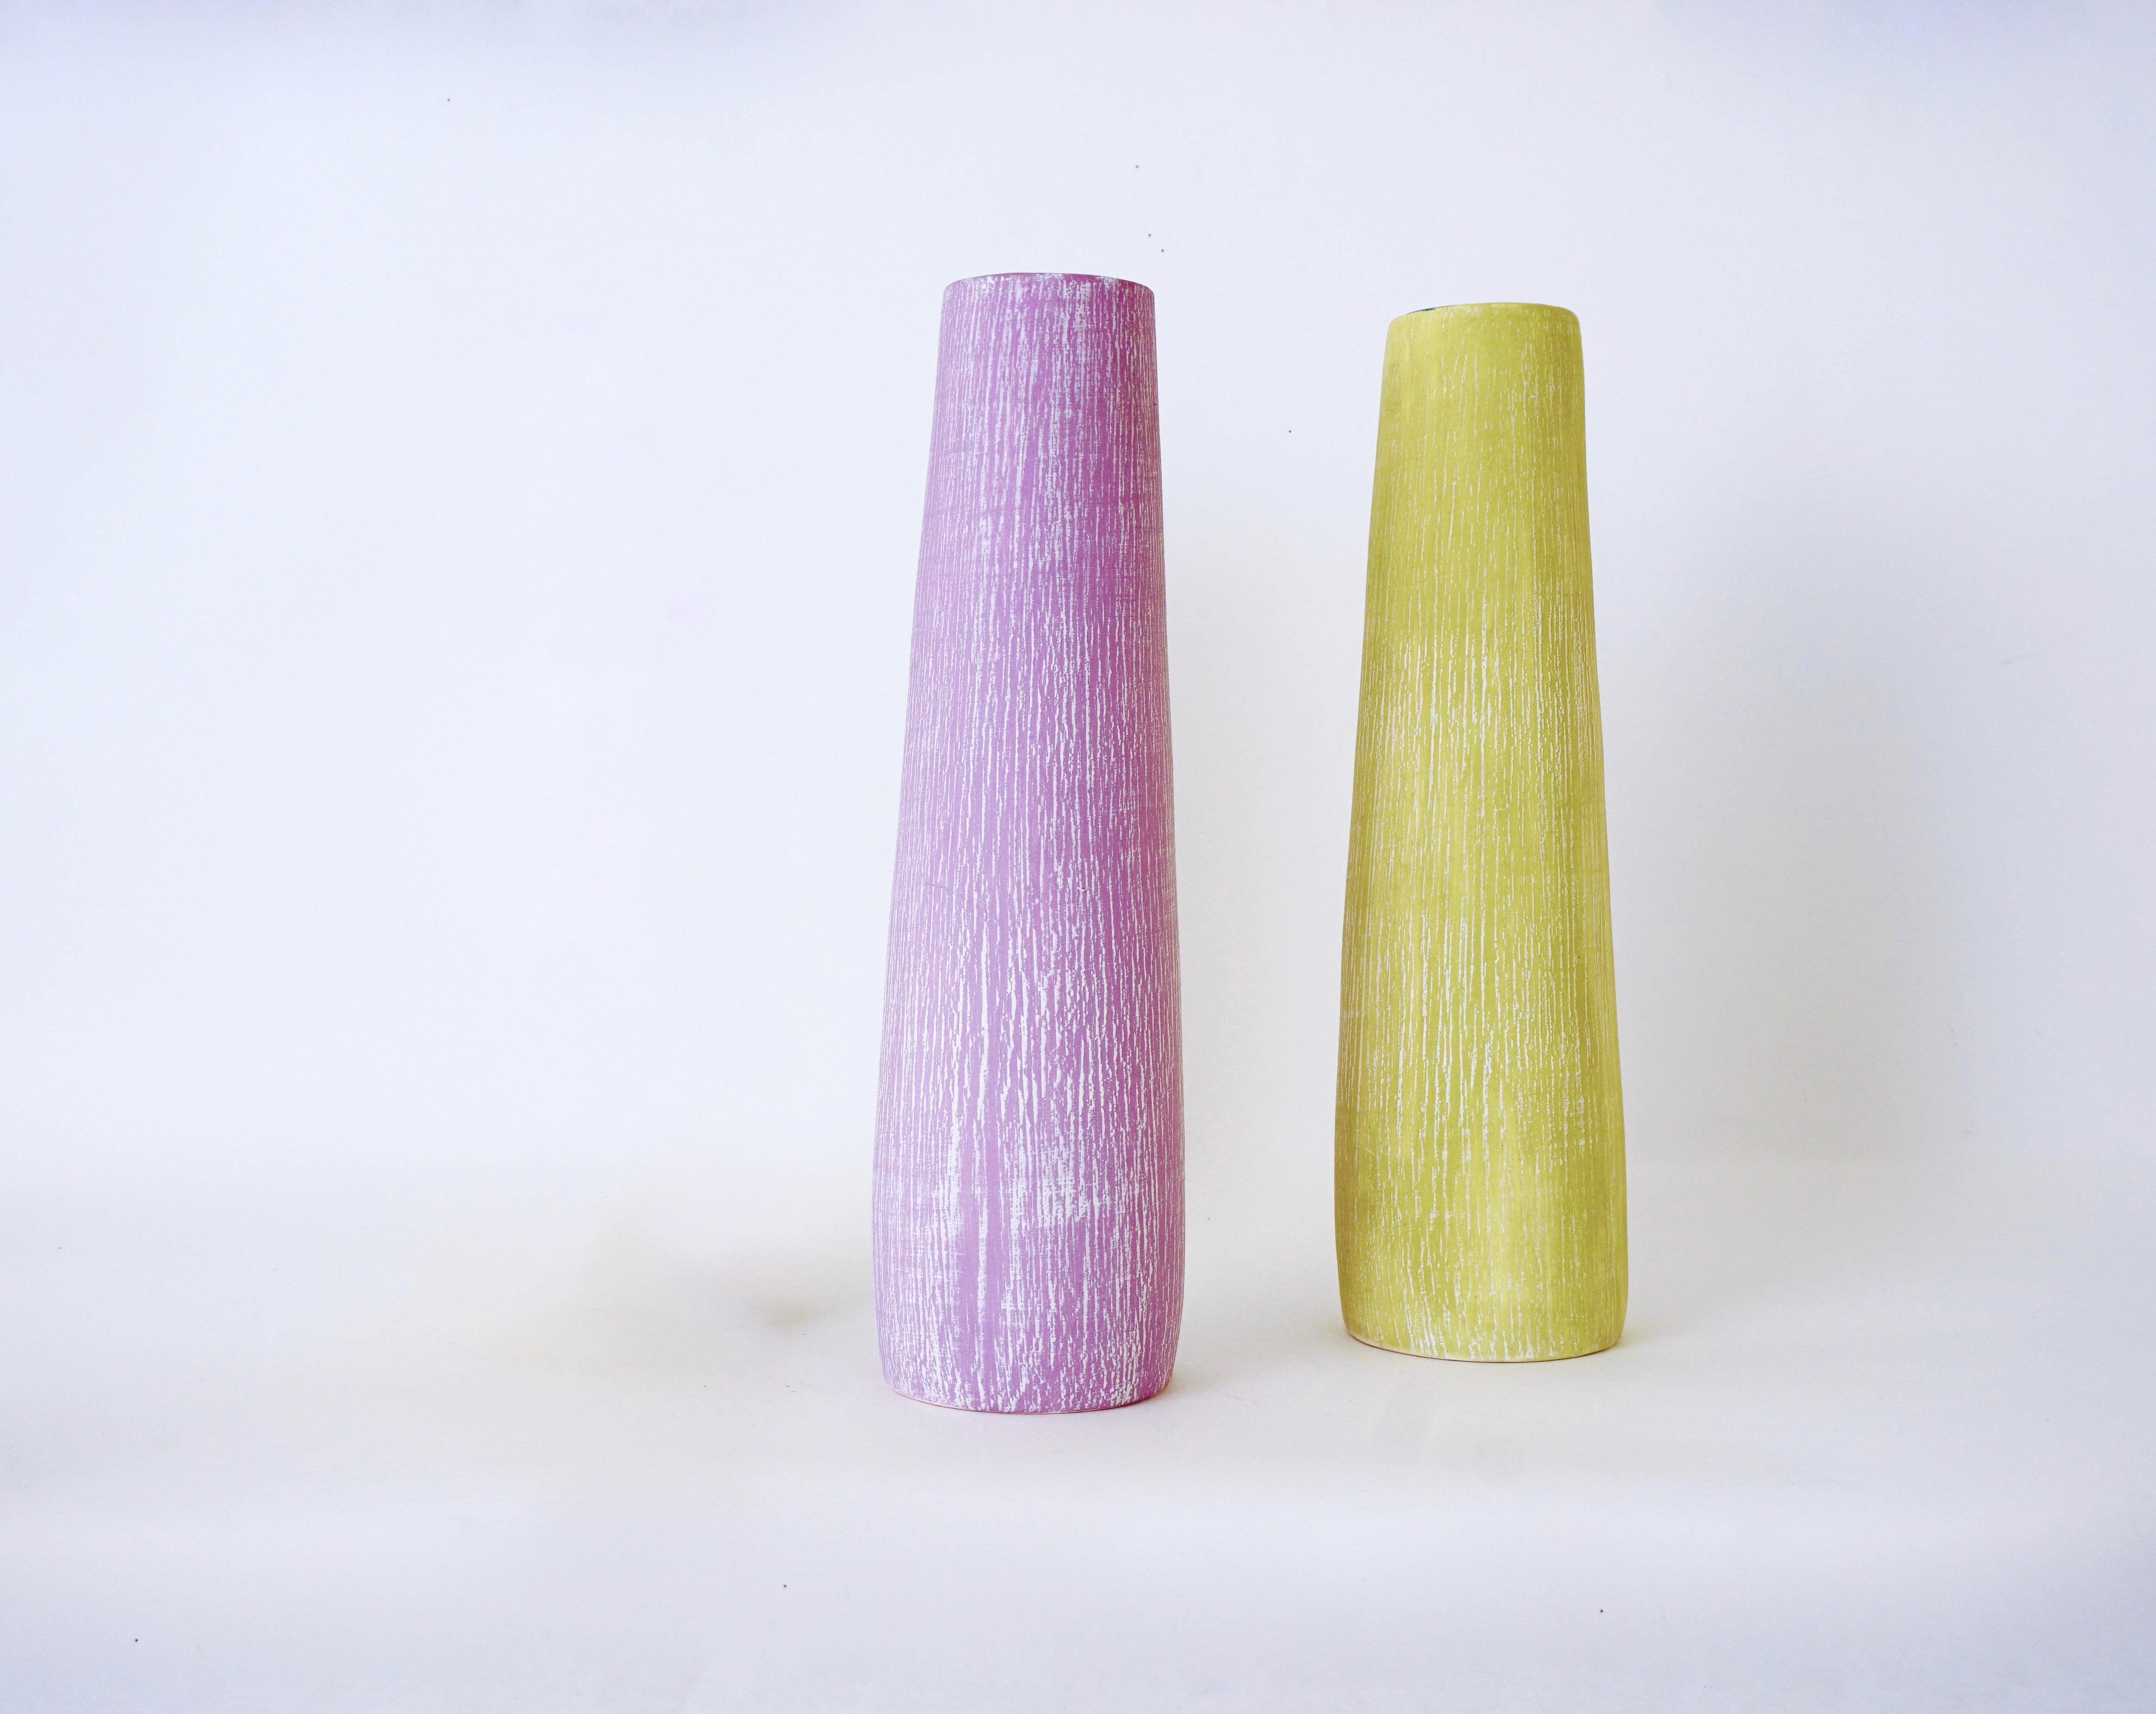 Late 20th Century Colored Vases from Finland, Set of 2